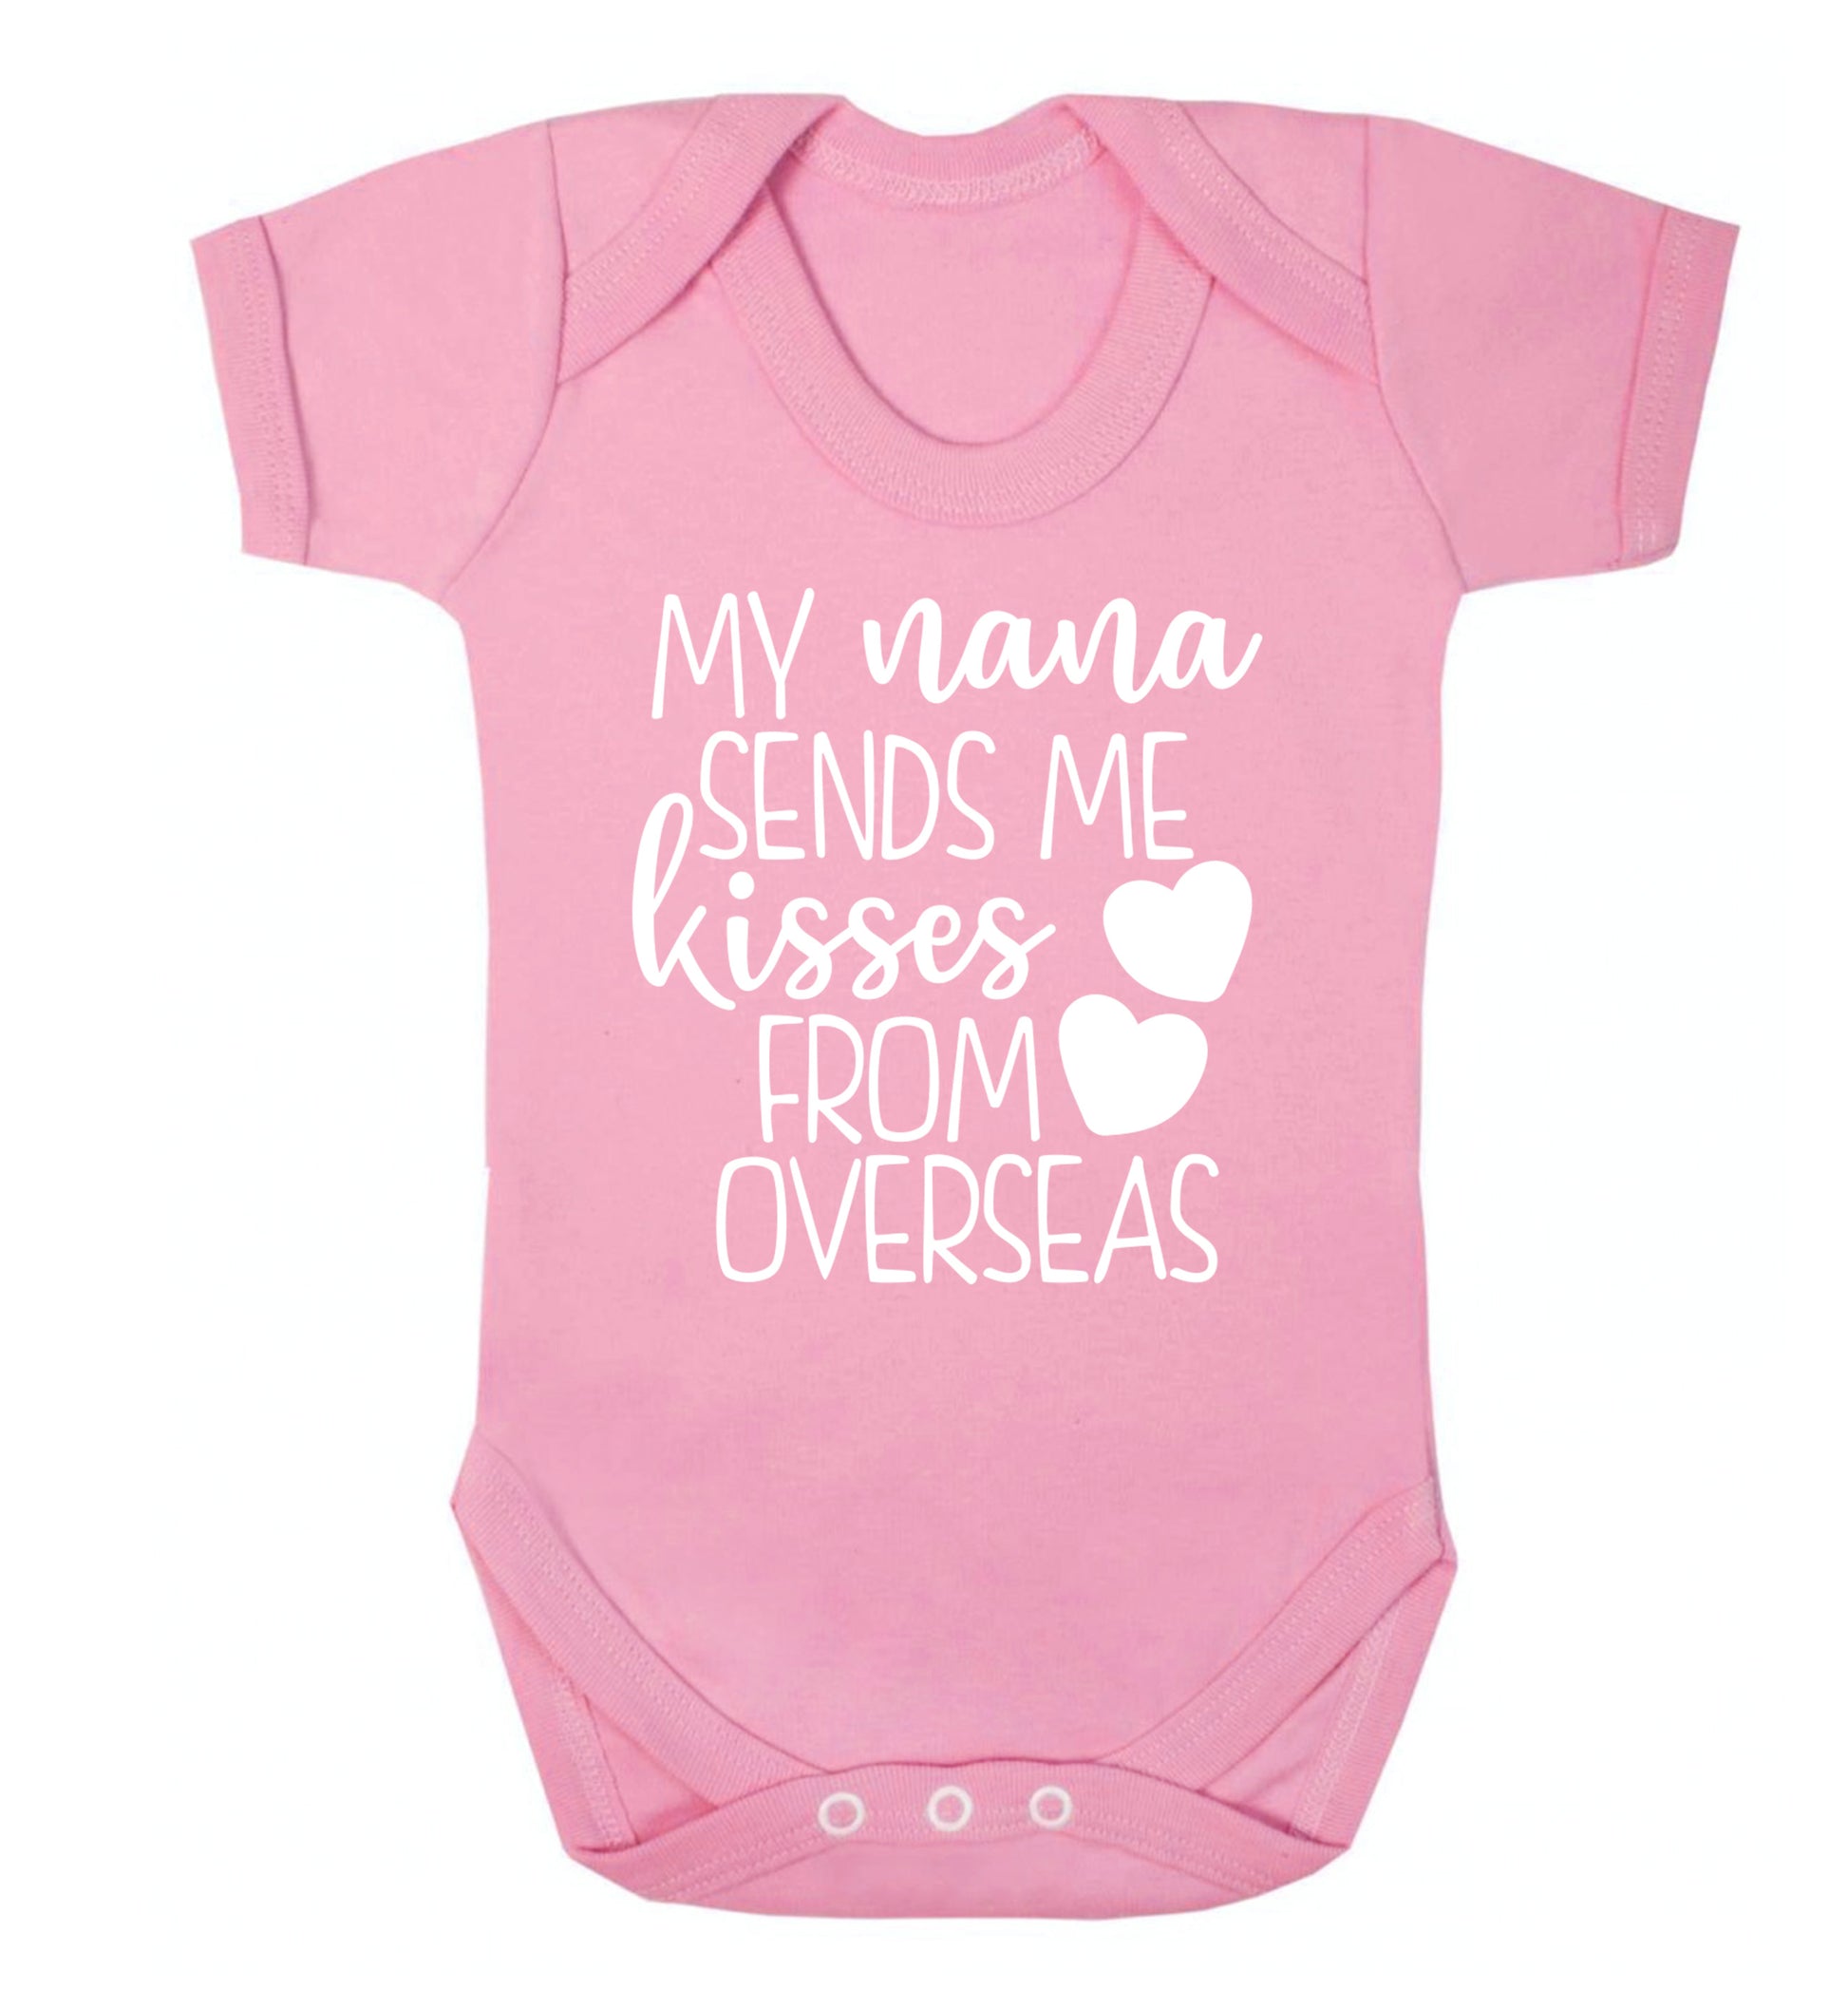 My nana sends me kisses from overseas Baby Vest pale pink 18-24 months